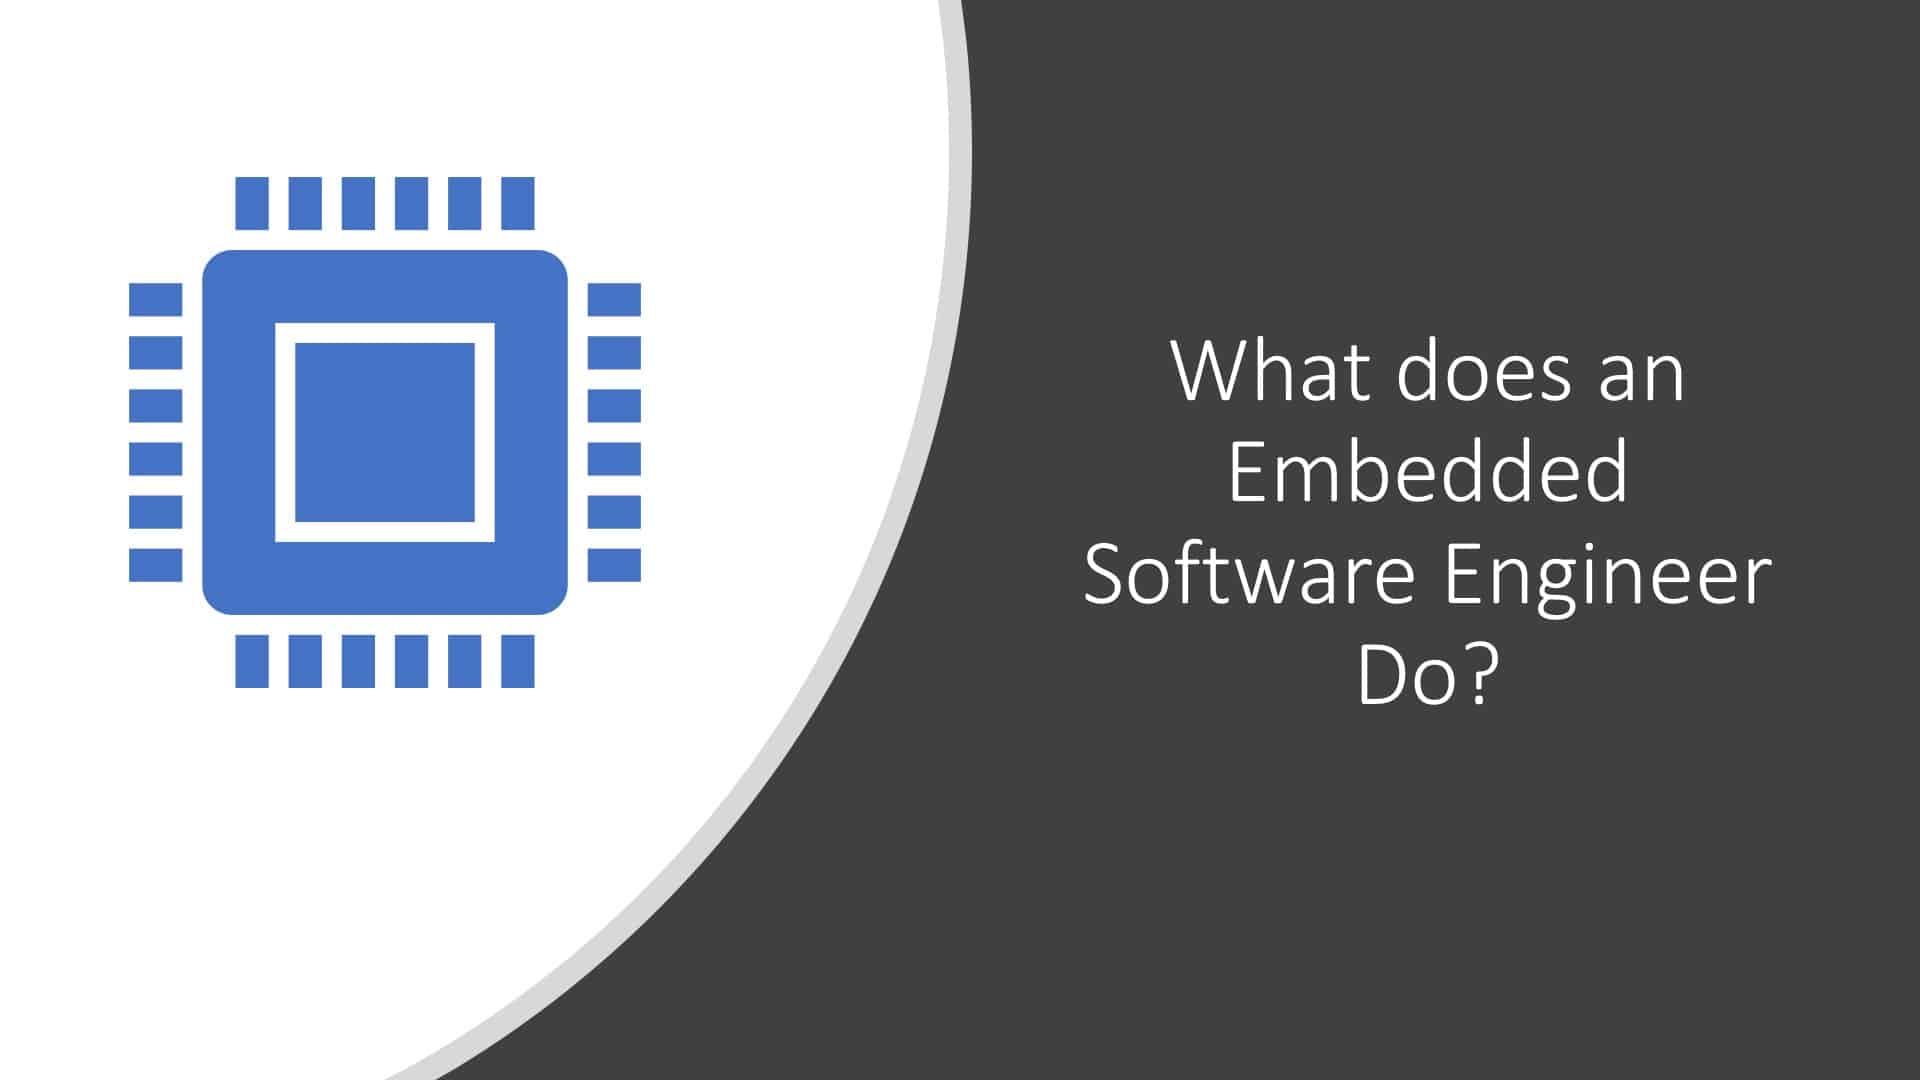 Video: What does an Embedded Software Engineer Do?